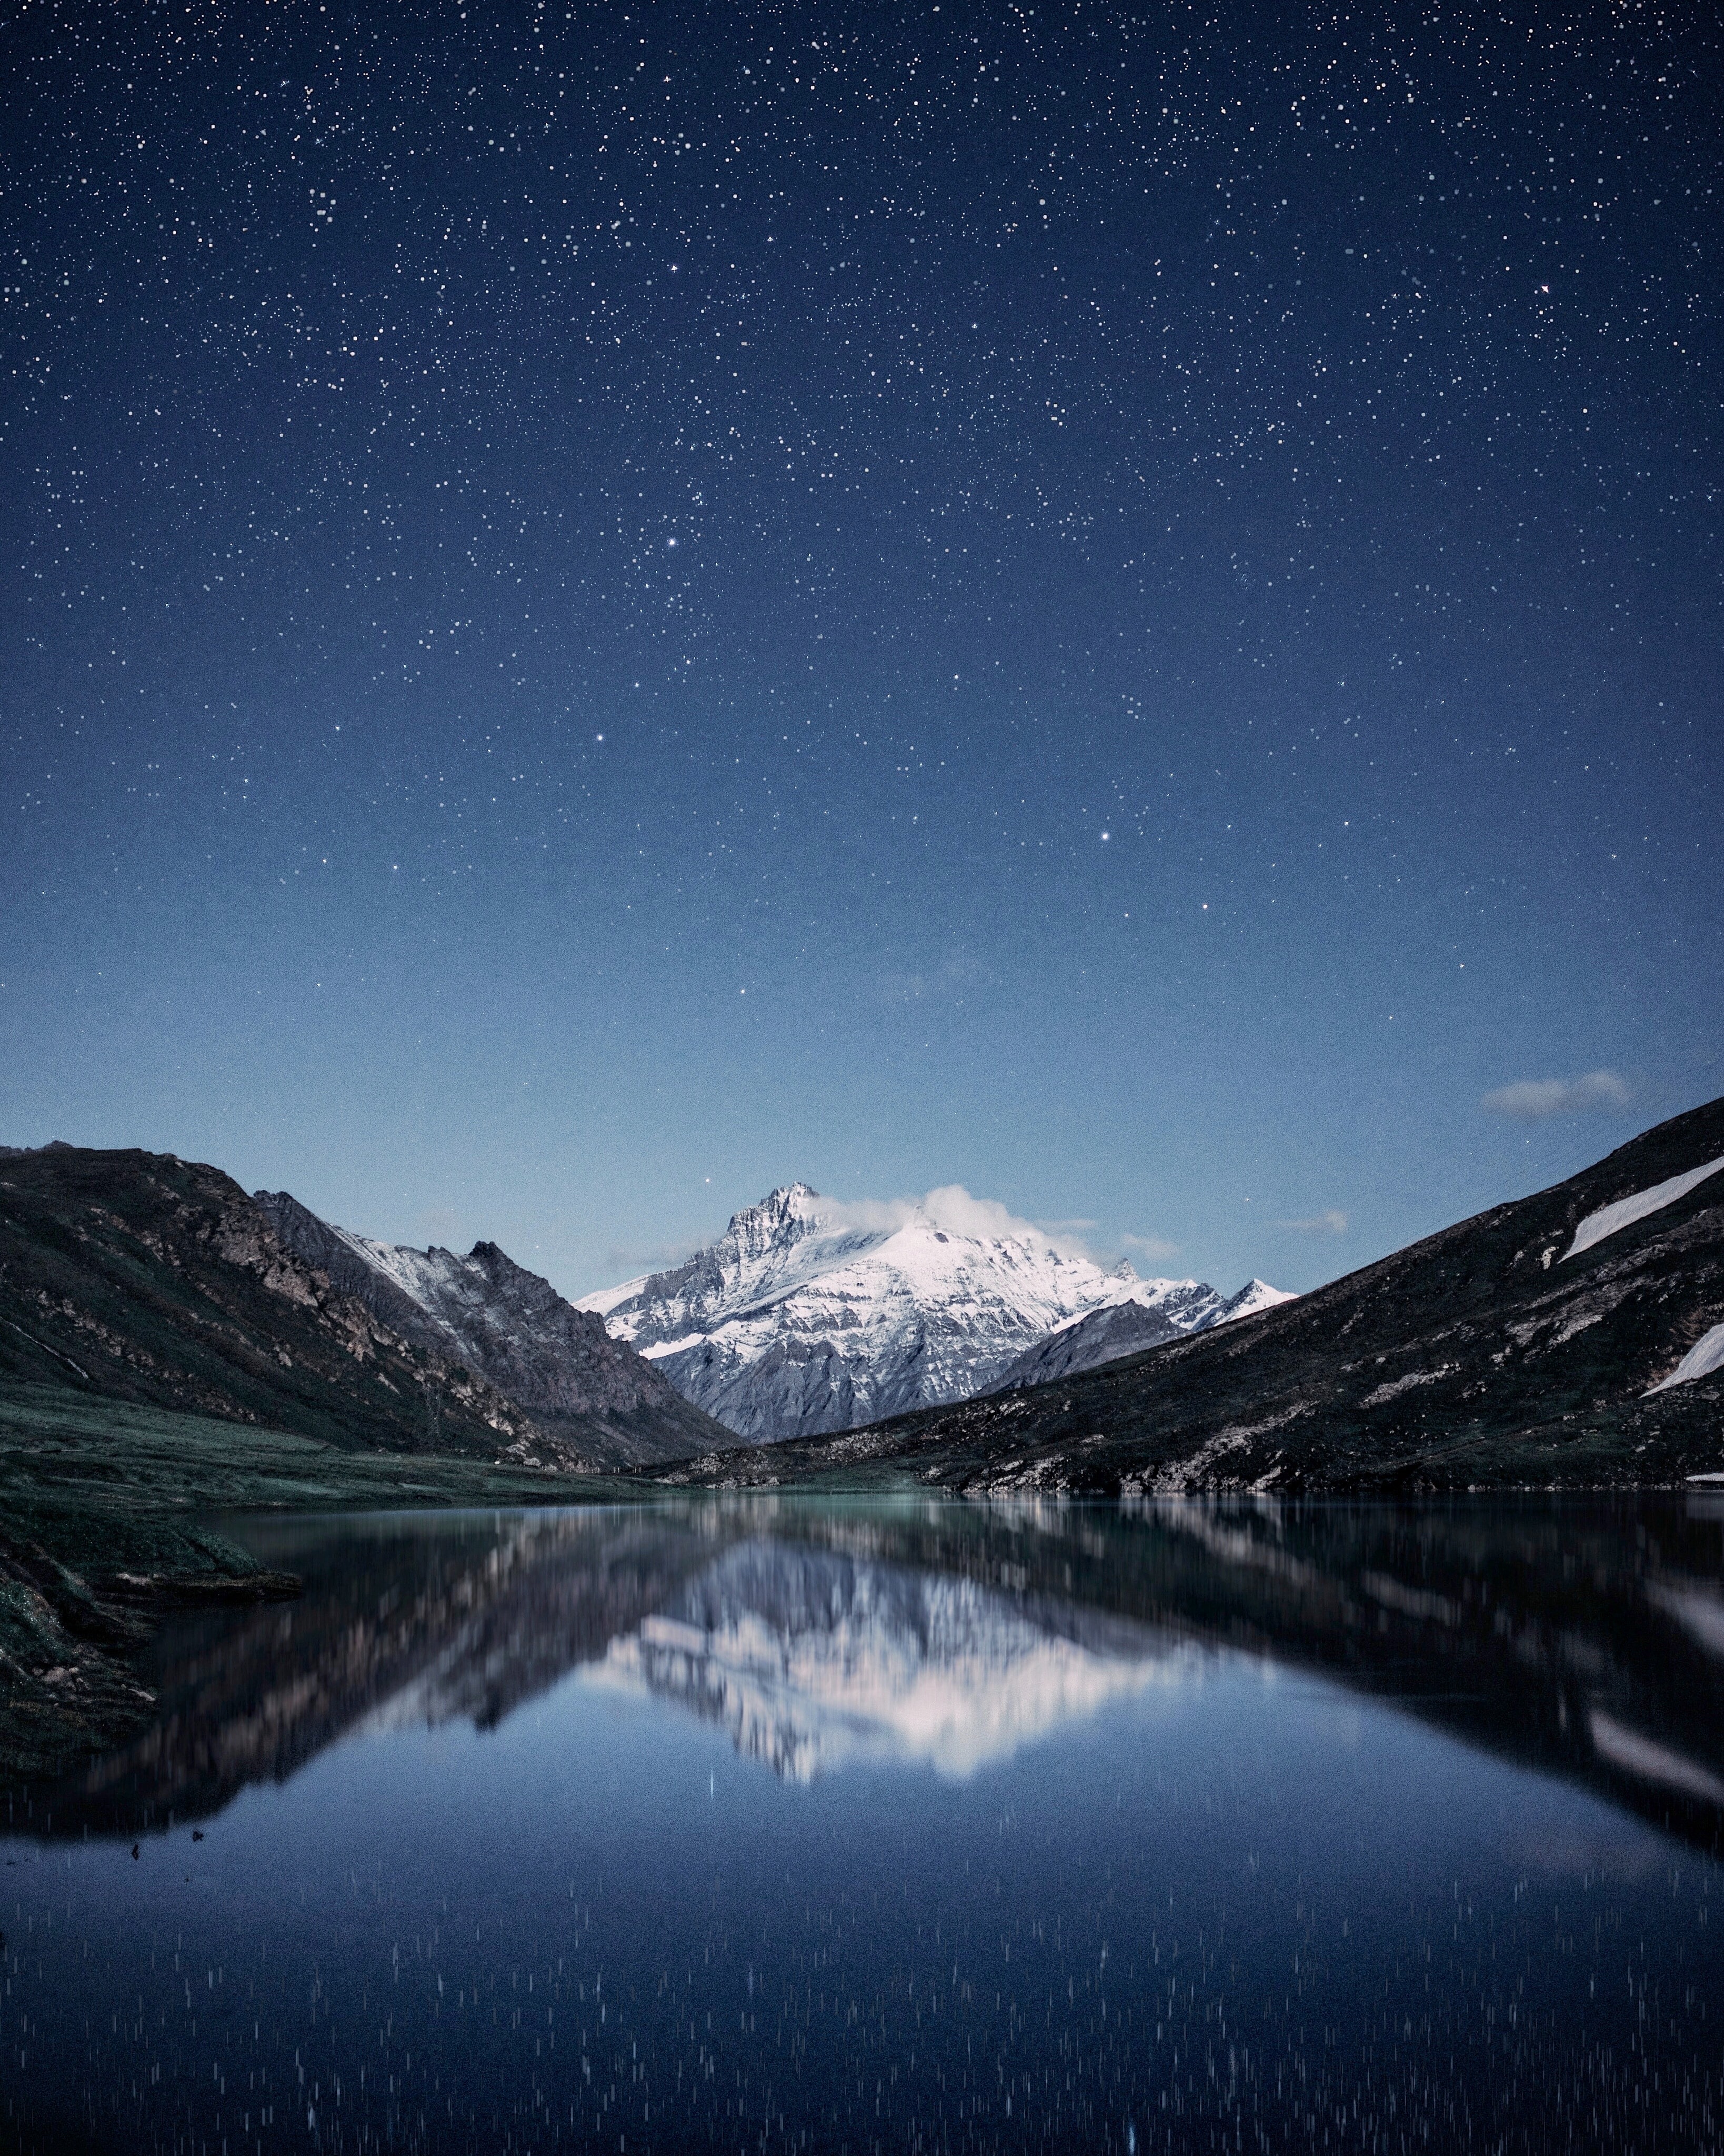 snowbound, snow covered, nature, mountains, night, reflection, starry sky Desktop Wallpaper